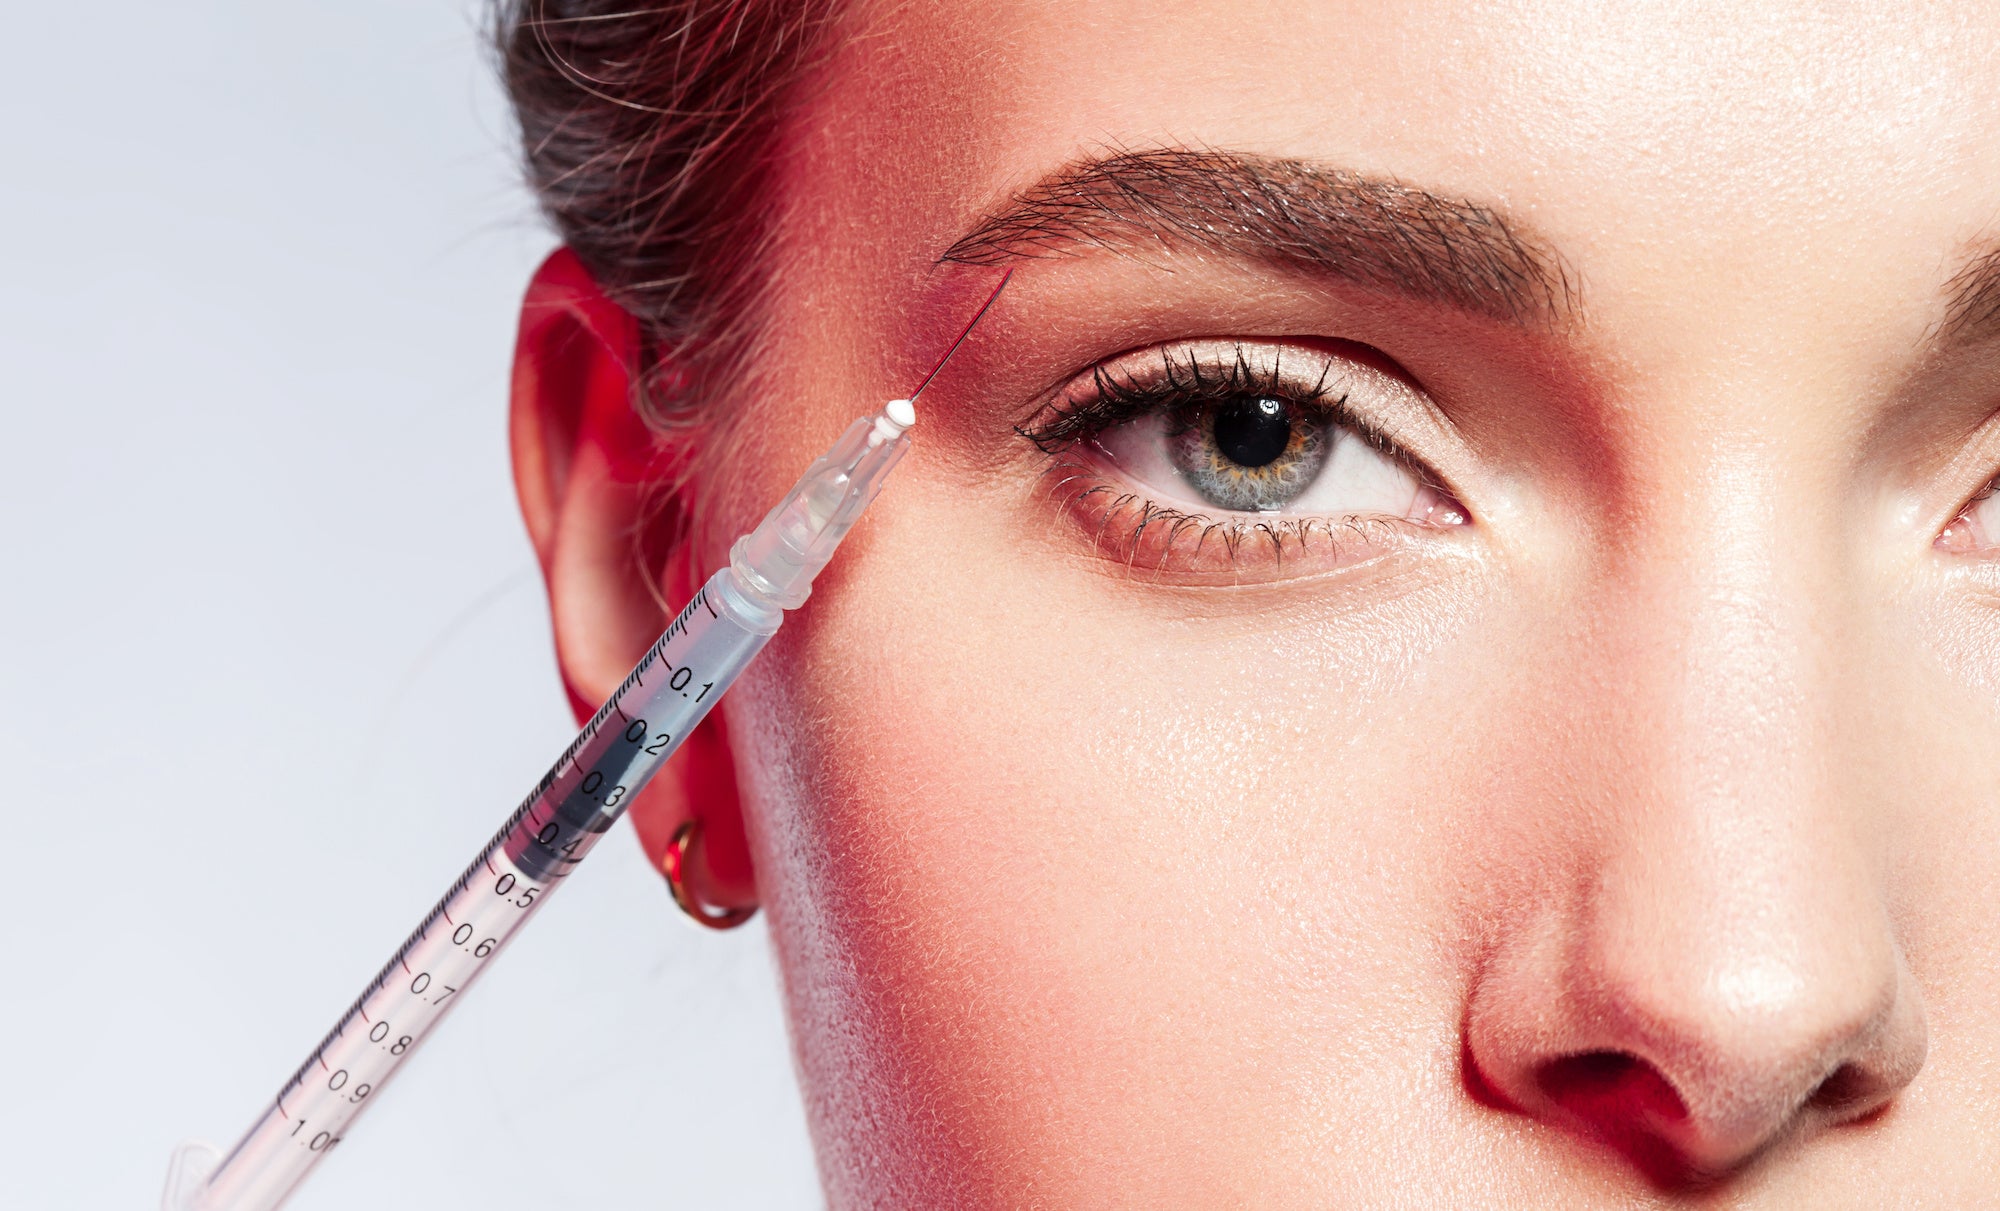 Browtox: The Trending Non-Surgical Alternative to Brow Lift Surgery